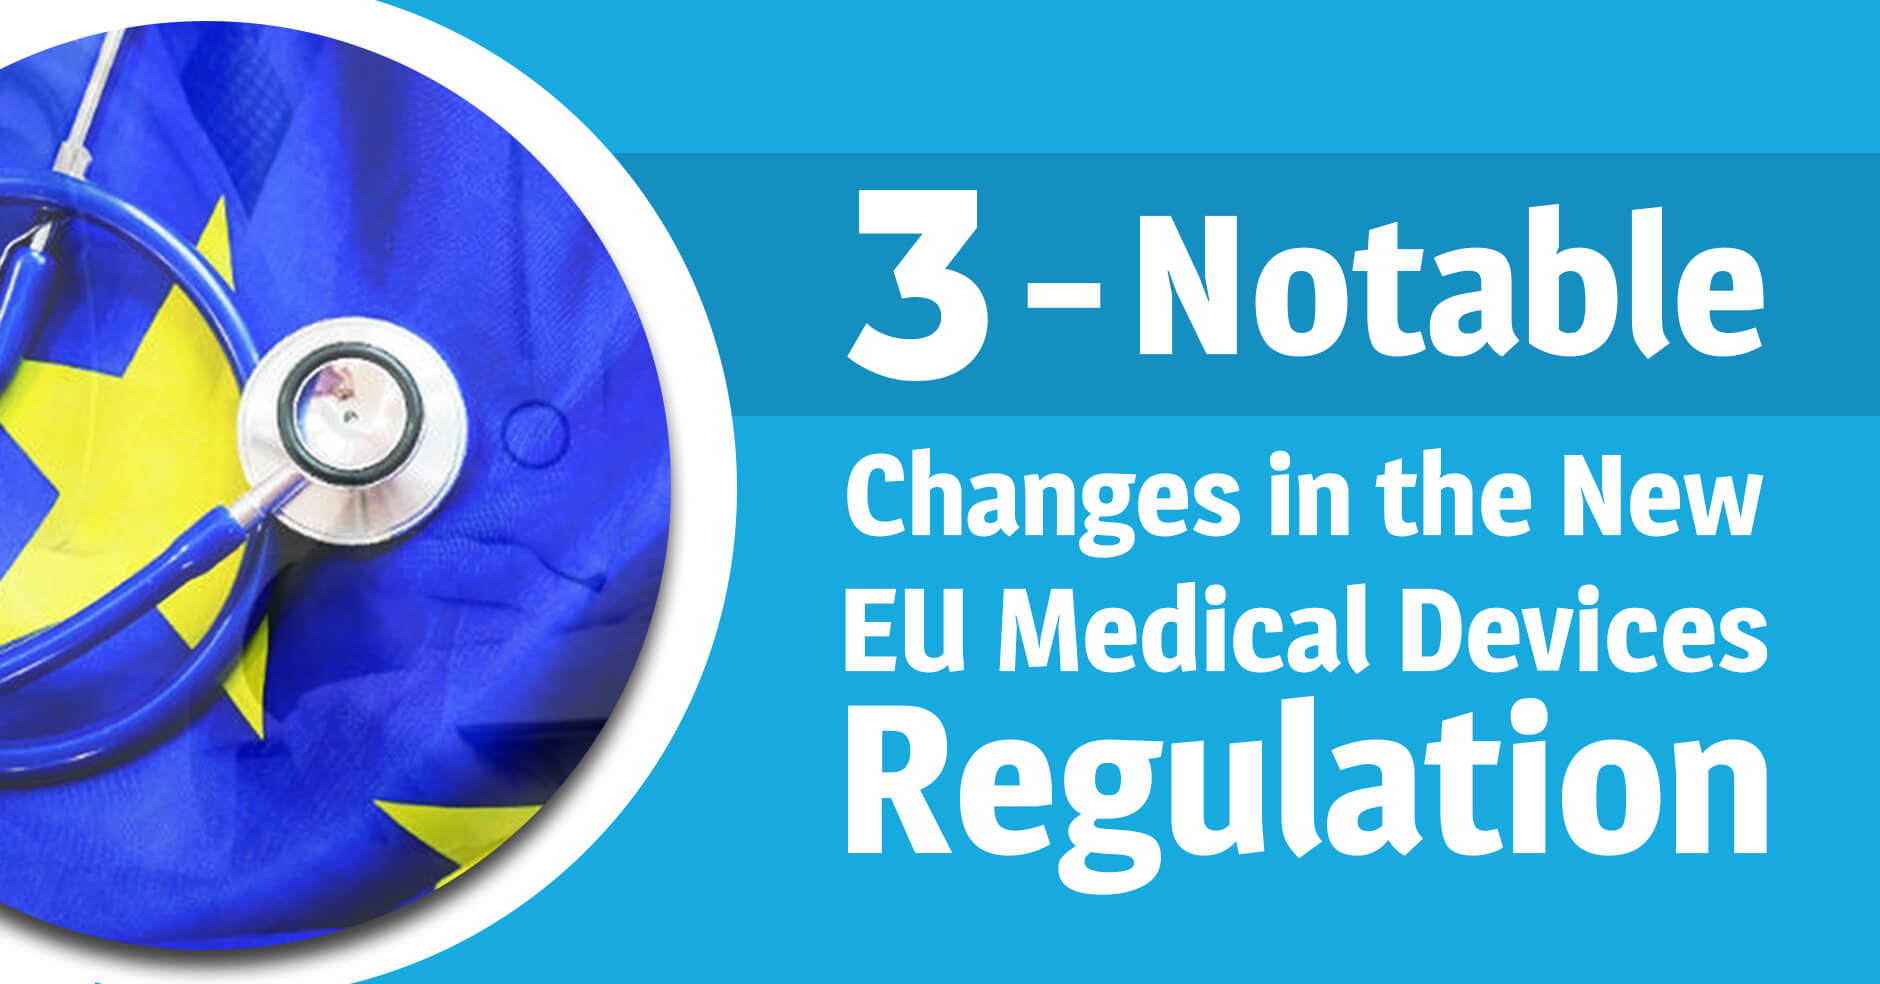 3 Notable Changes in the New EU Medical Devices Regulation